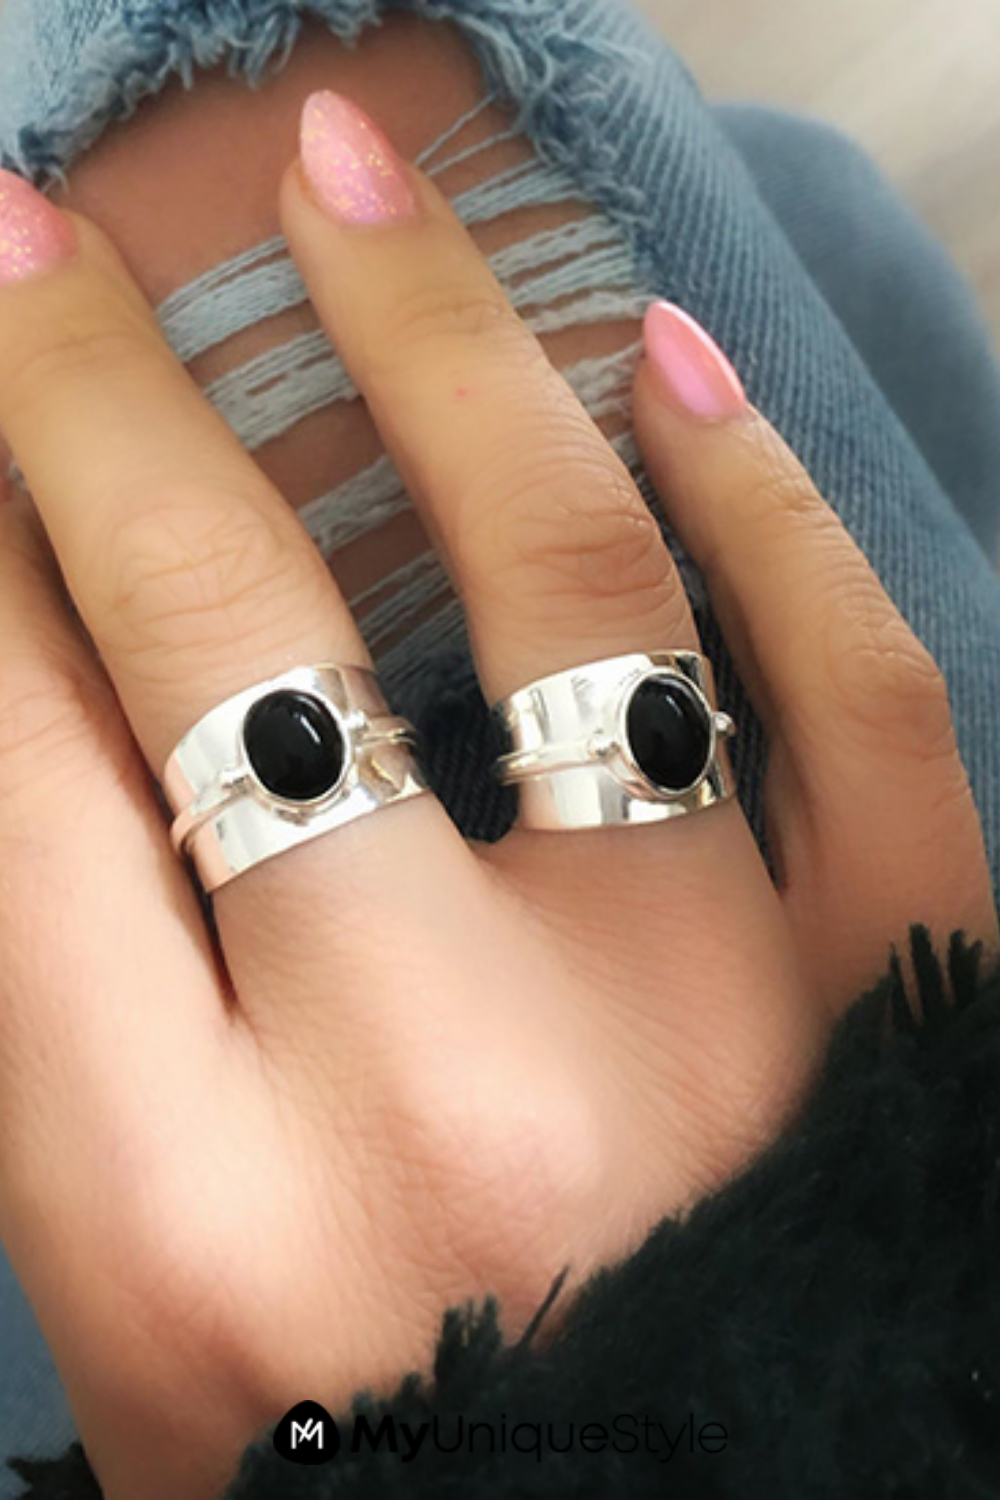 Get the perfect match to your standard with onyx ring